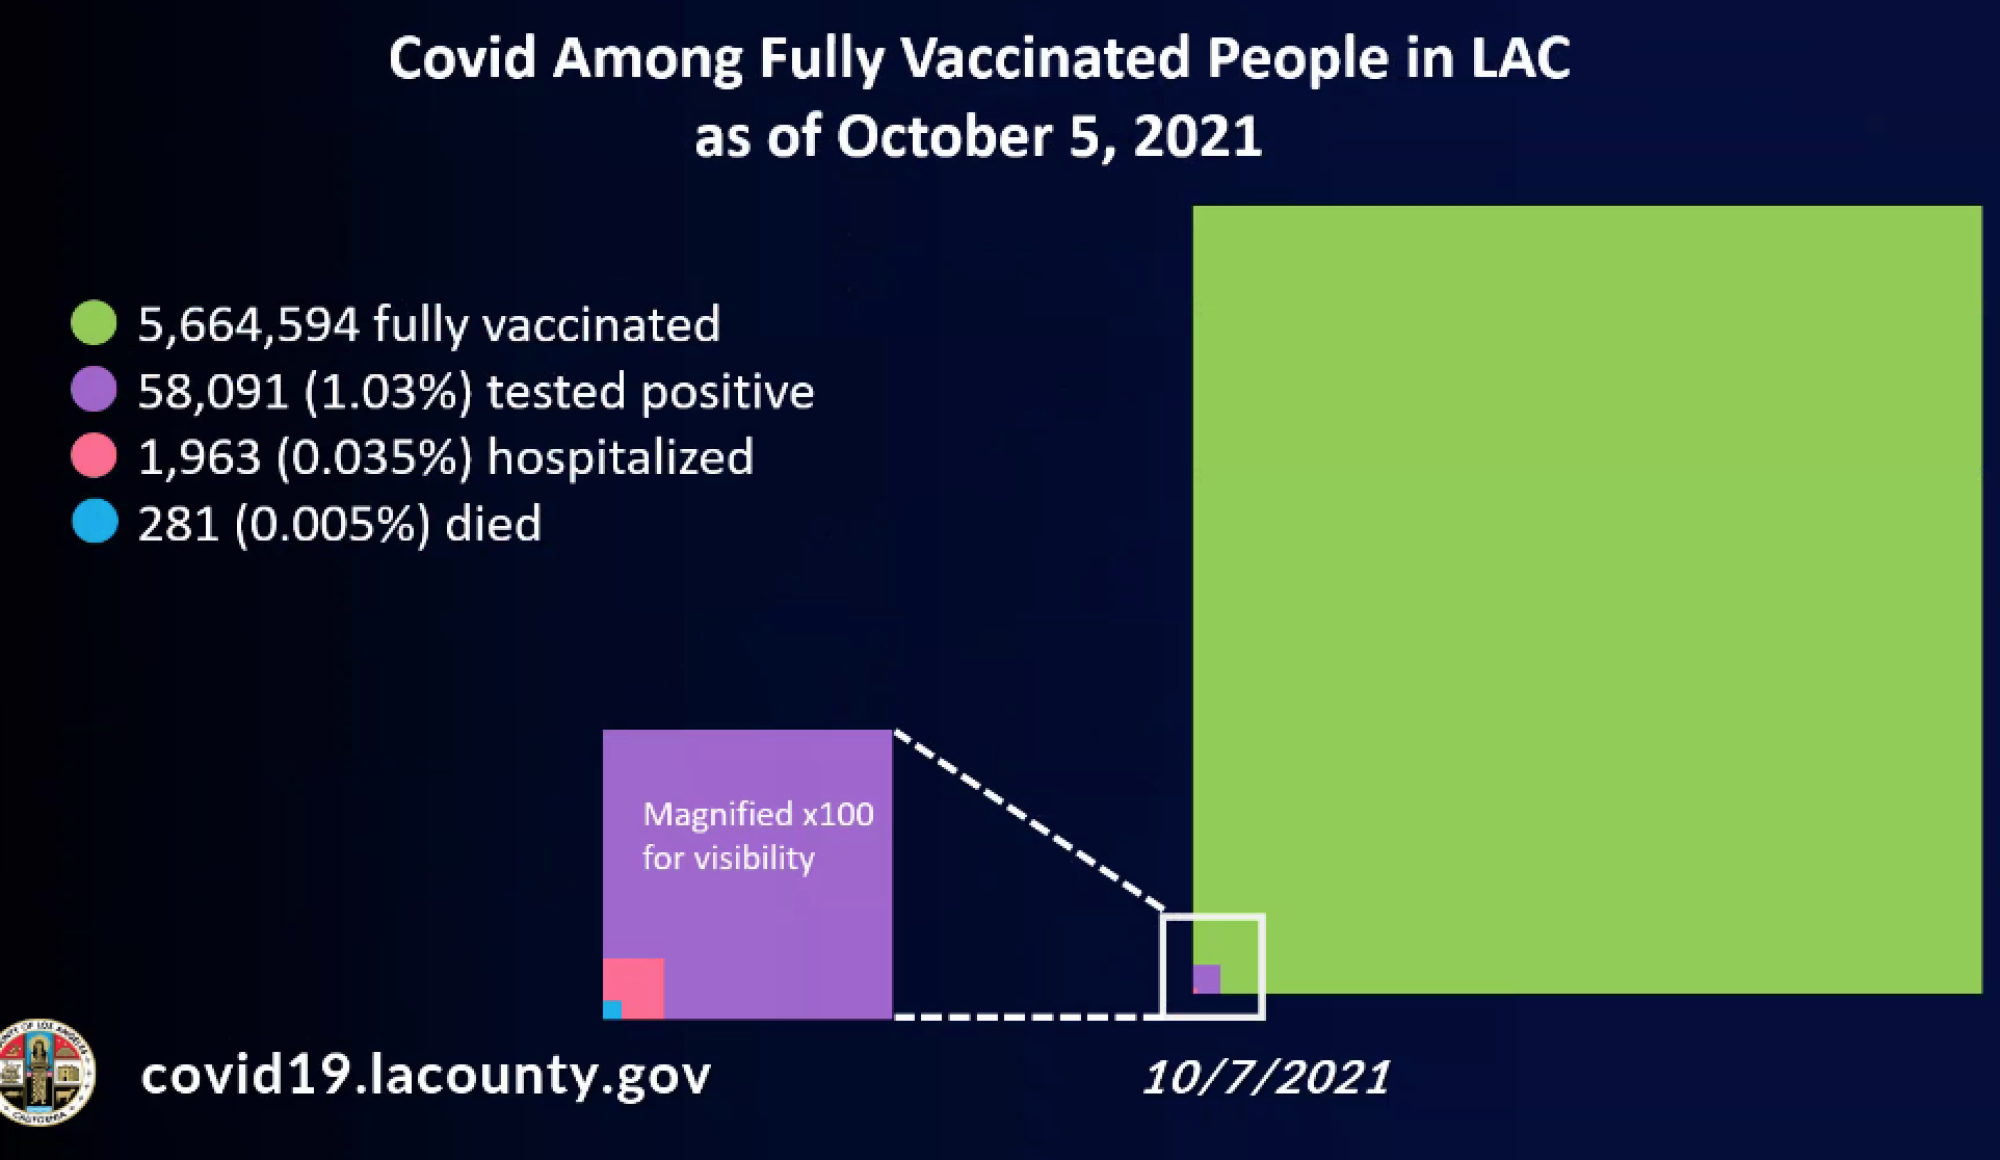 COVID-19 among fully vaccinated people in L.A. County as of Oct. 5, 2021